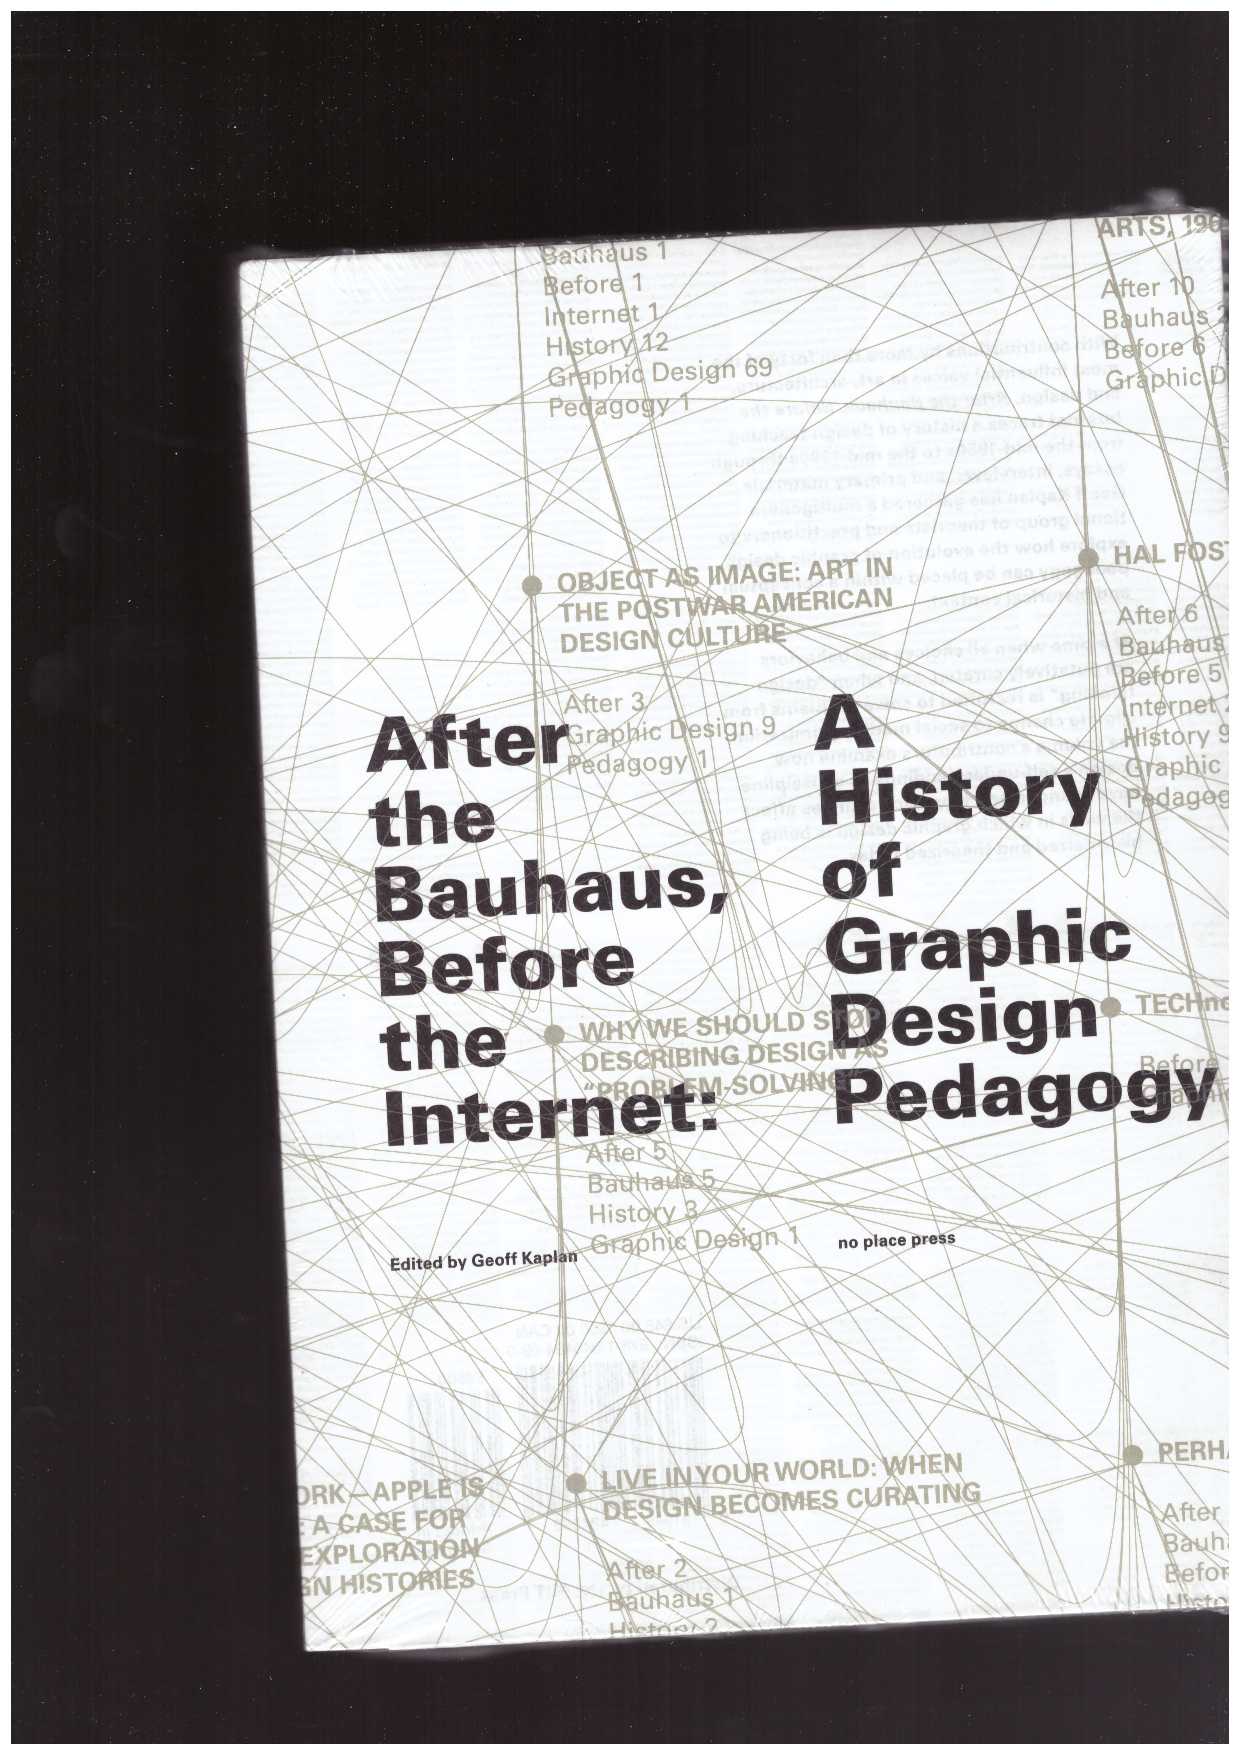 KAPLAN, Geoff (ed) - After the Bauhaus, Before the Internet. A History of Graphic Design Pedagogy